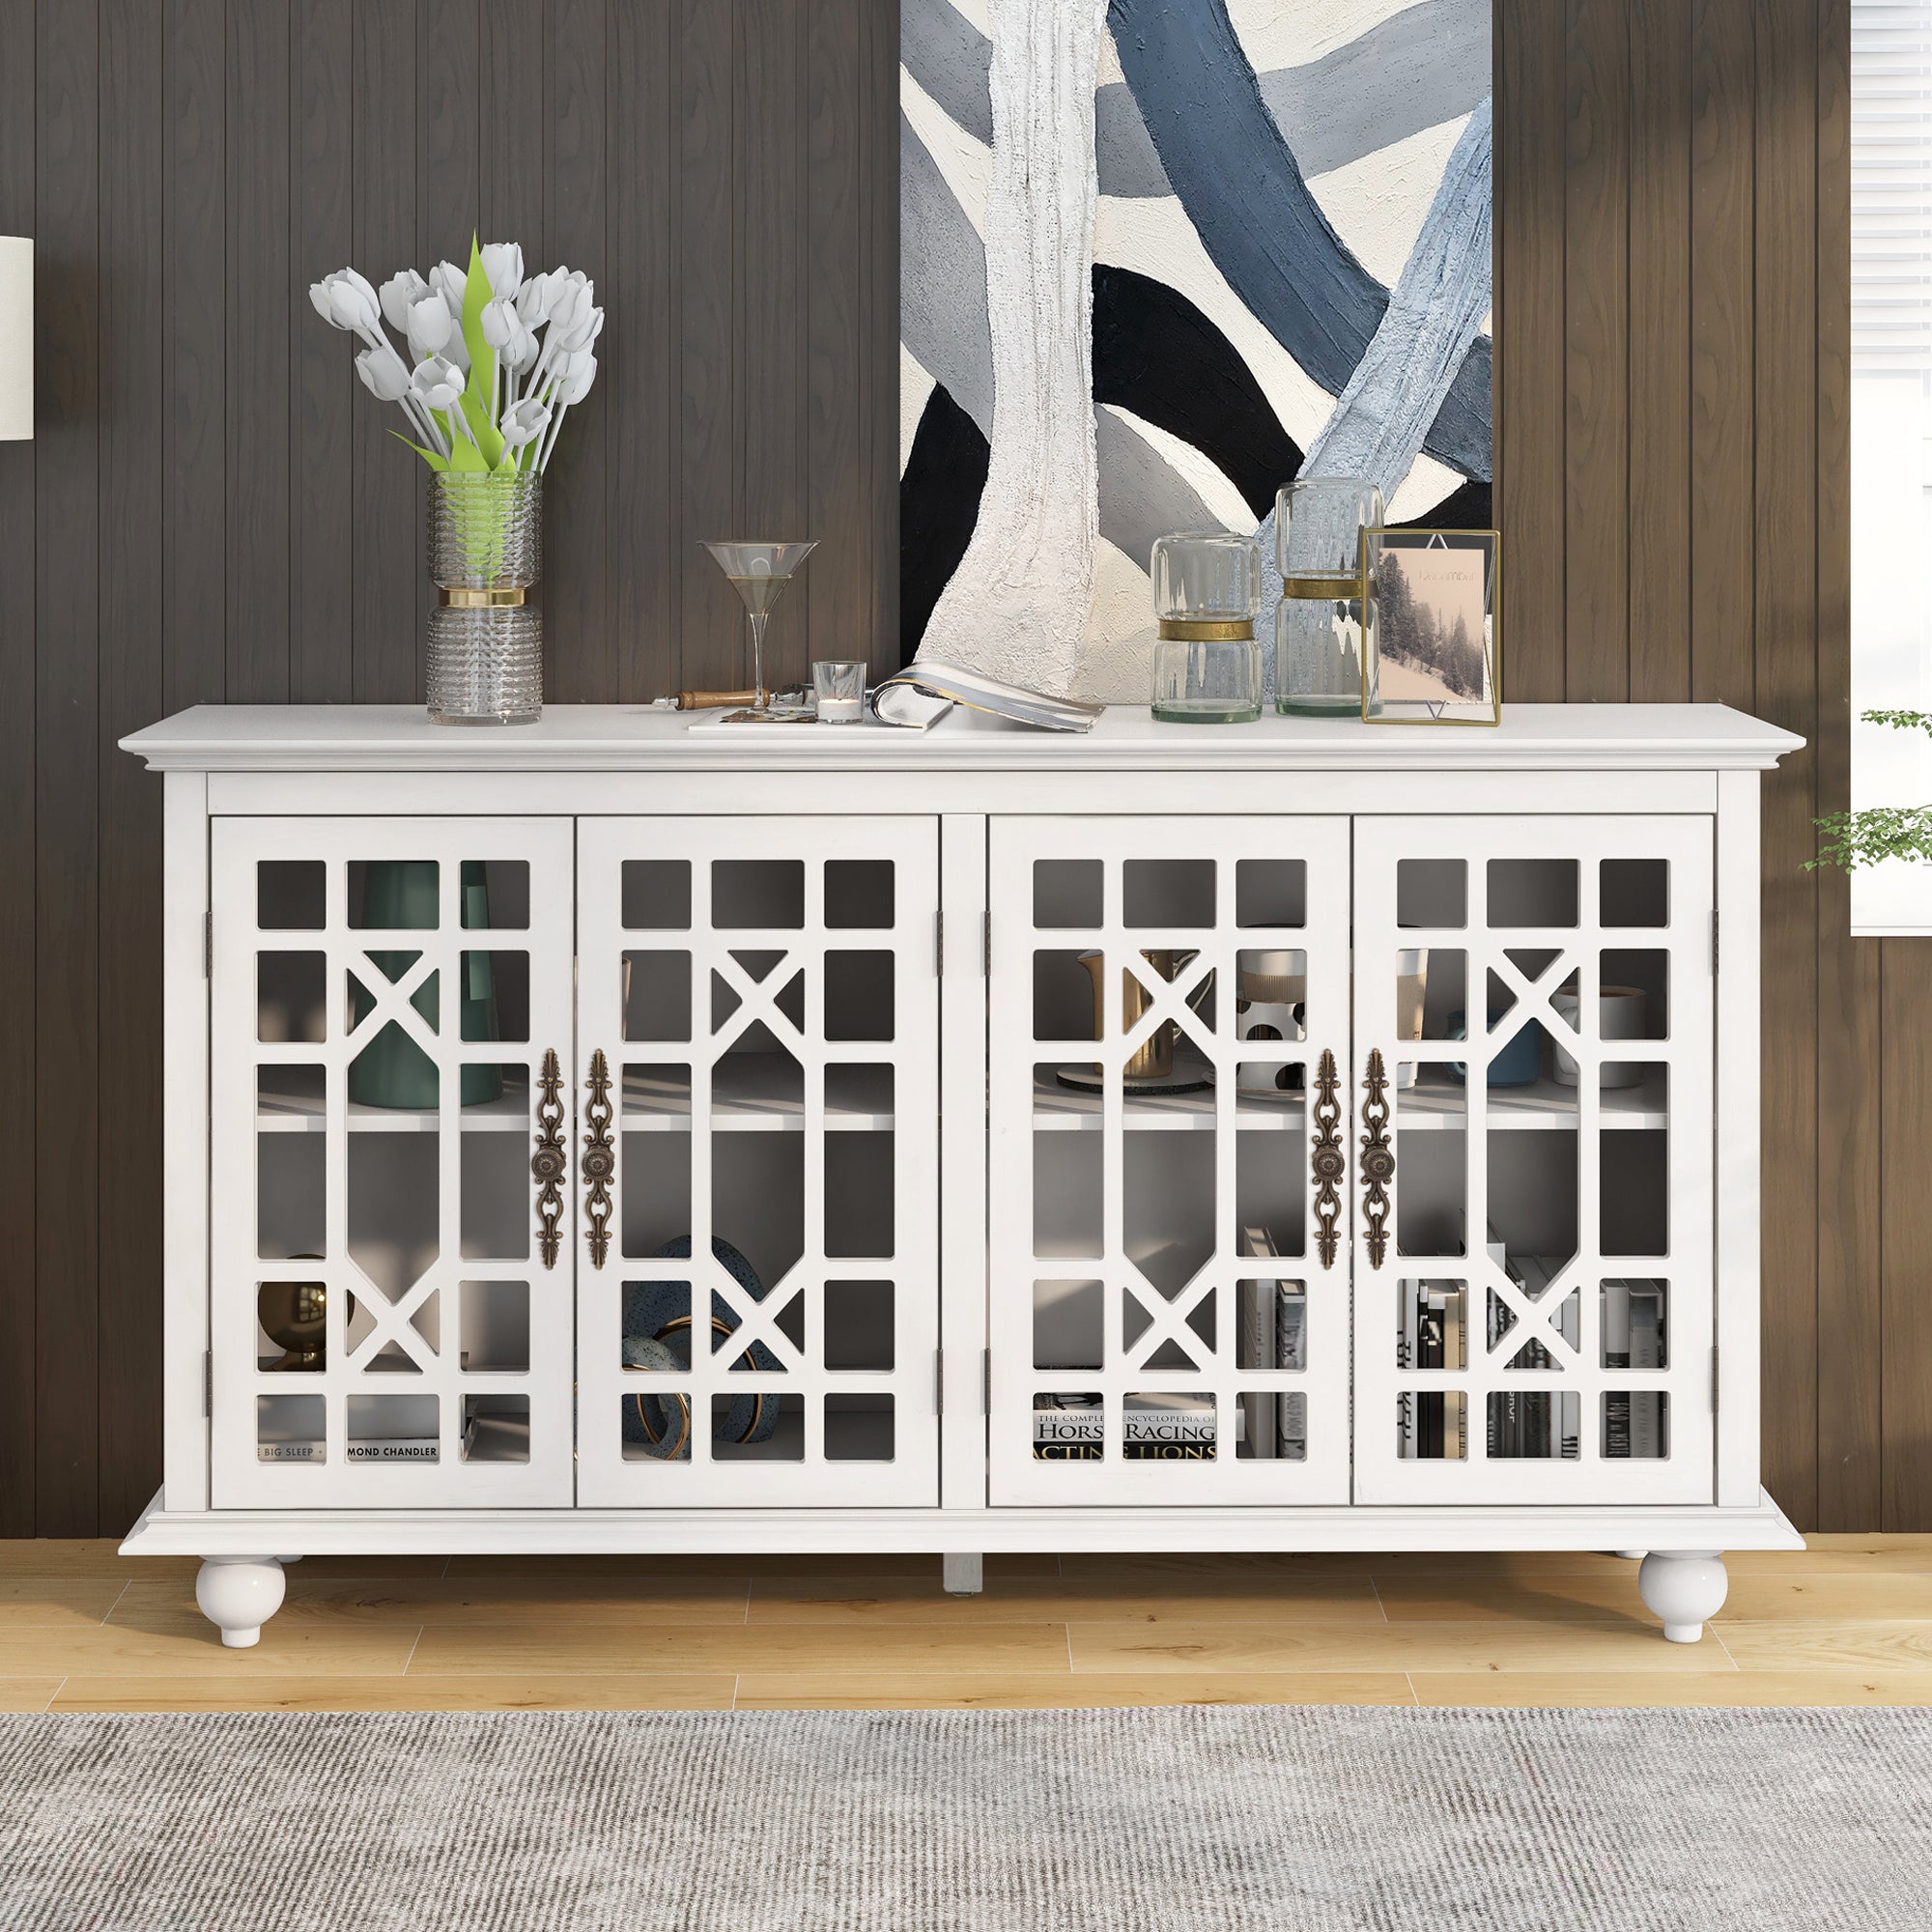 Sideboard with Adjustable Height Shelves, Metal antique white-mdf